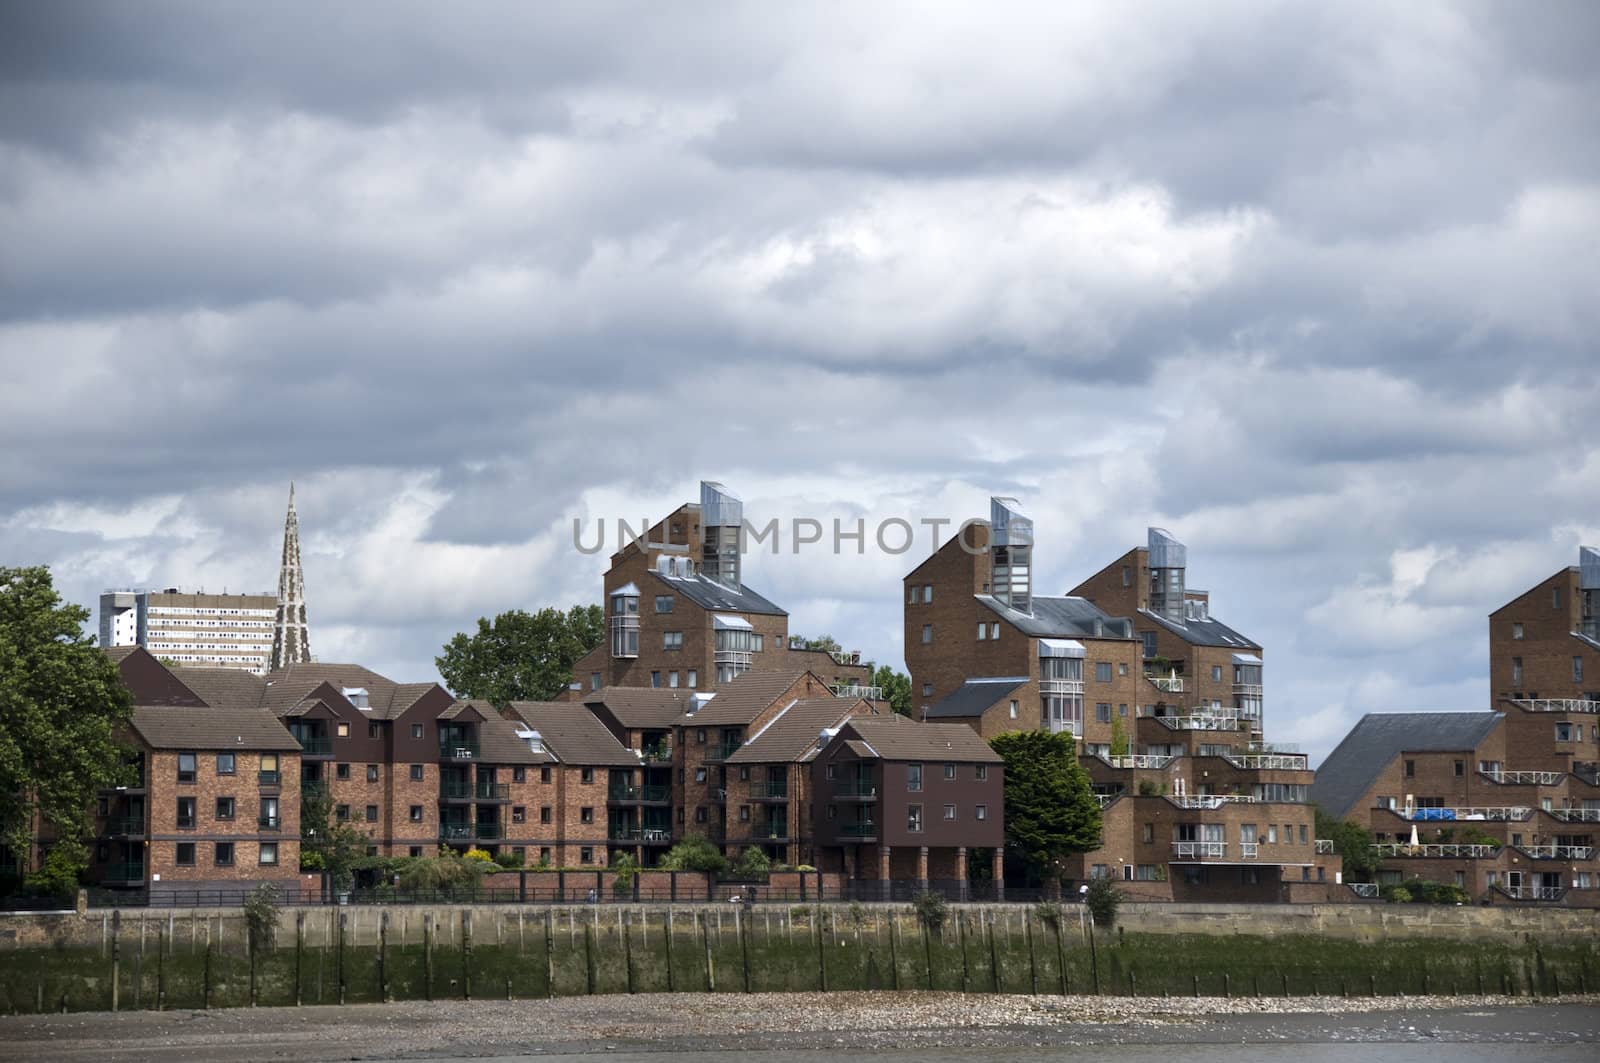 A view of some river side apartments in london